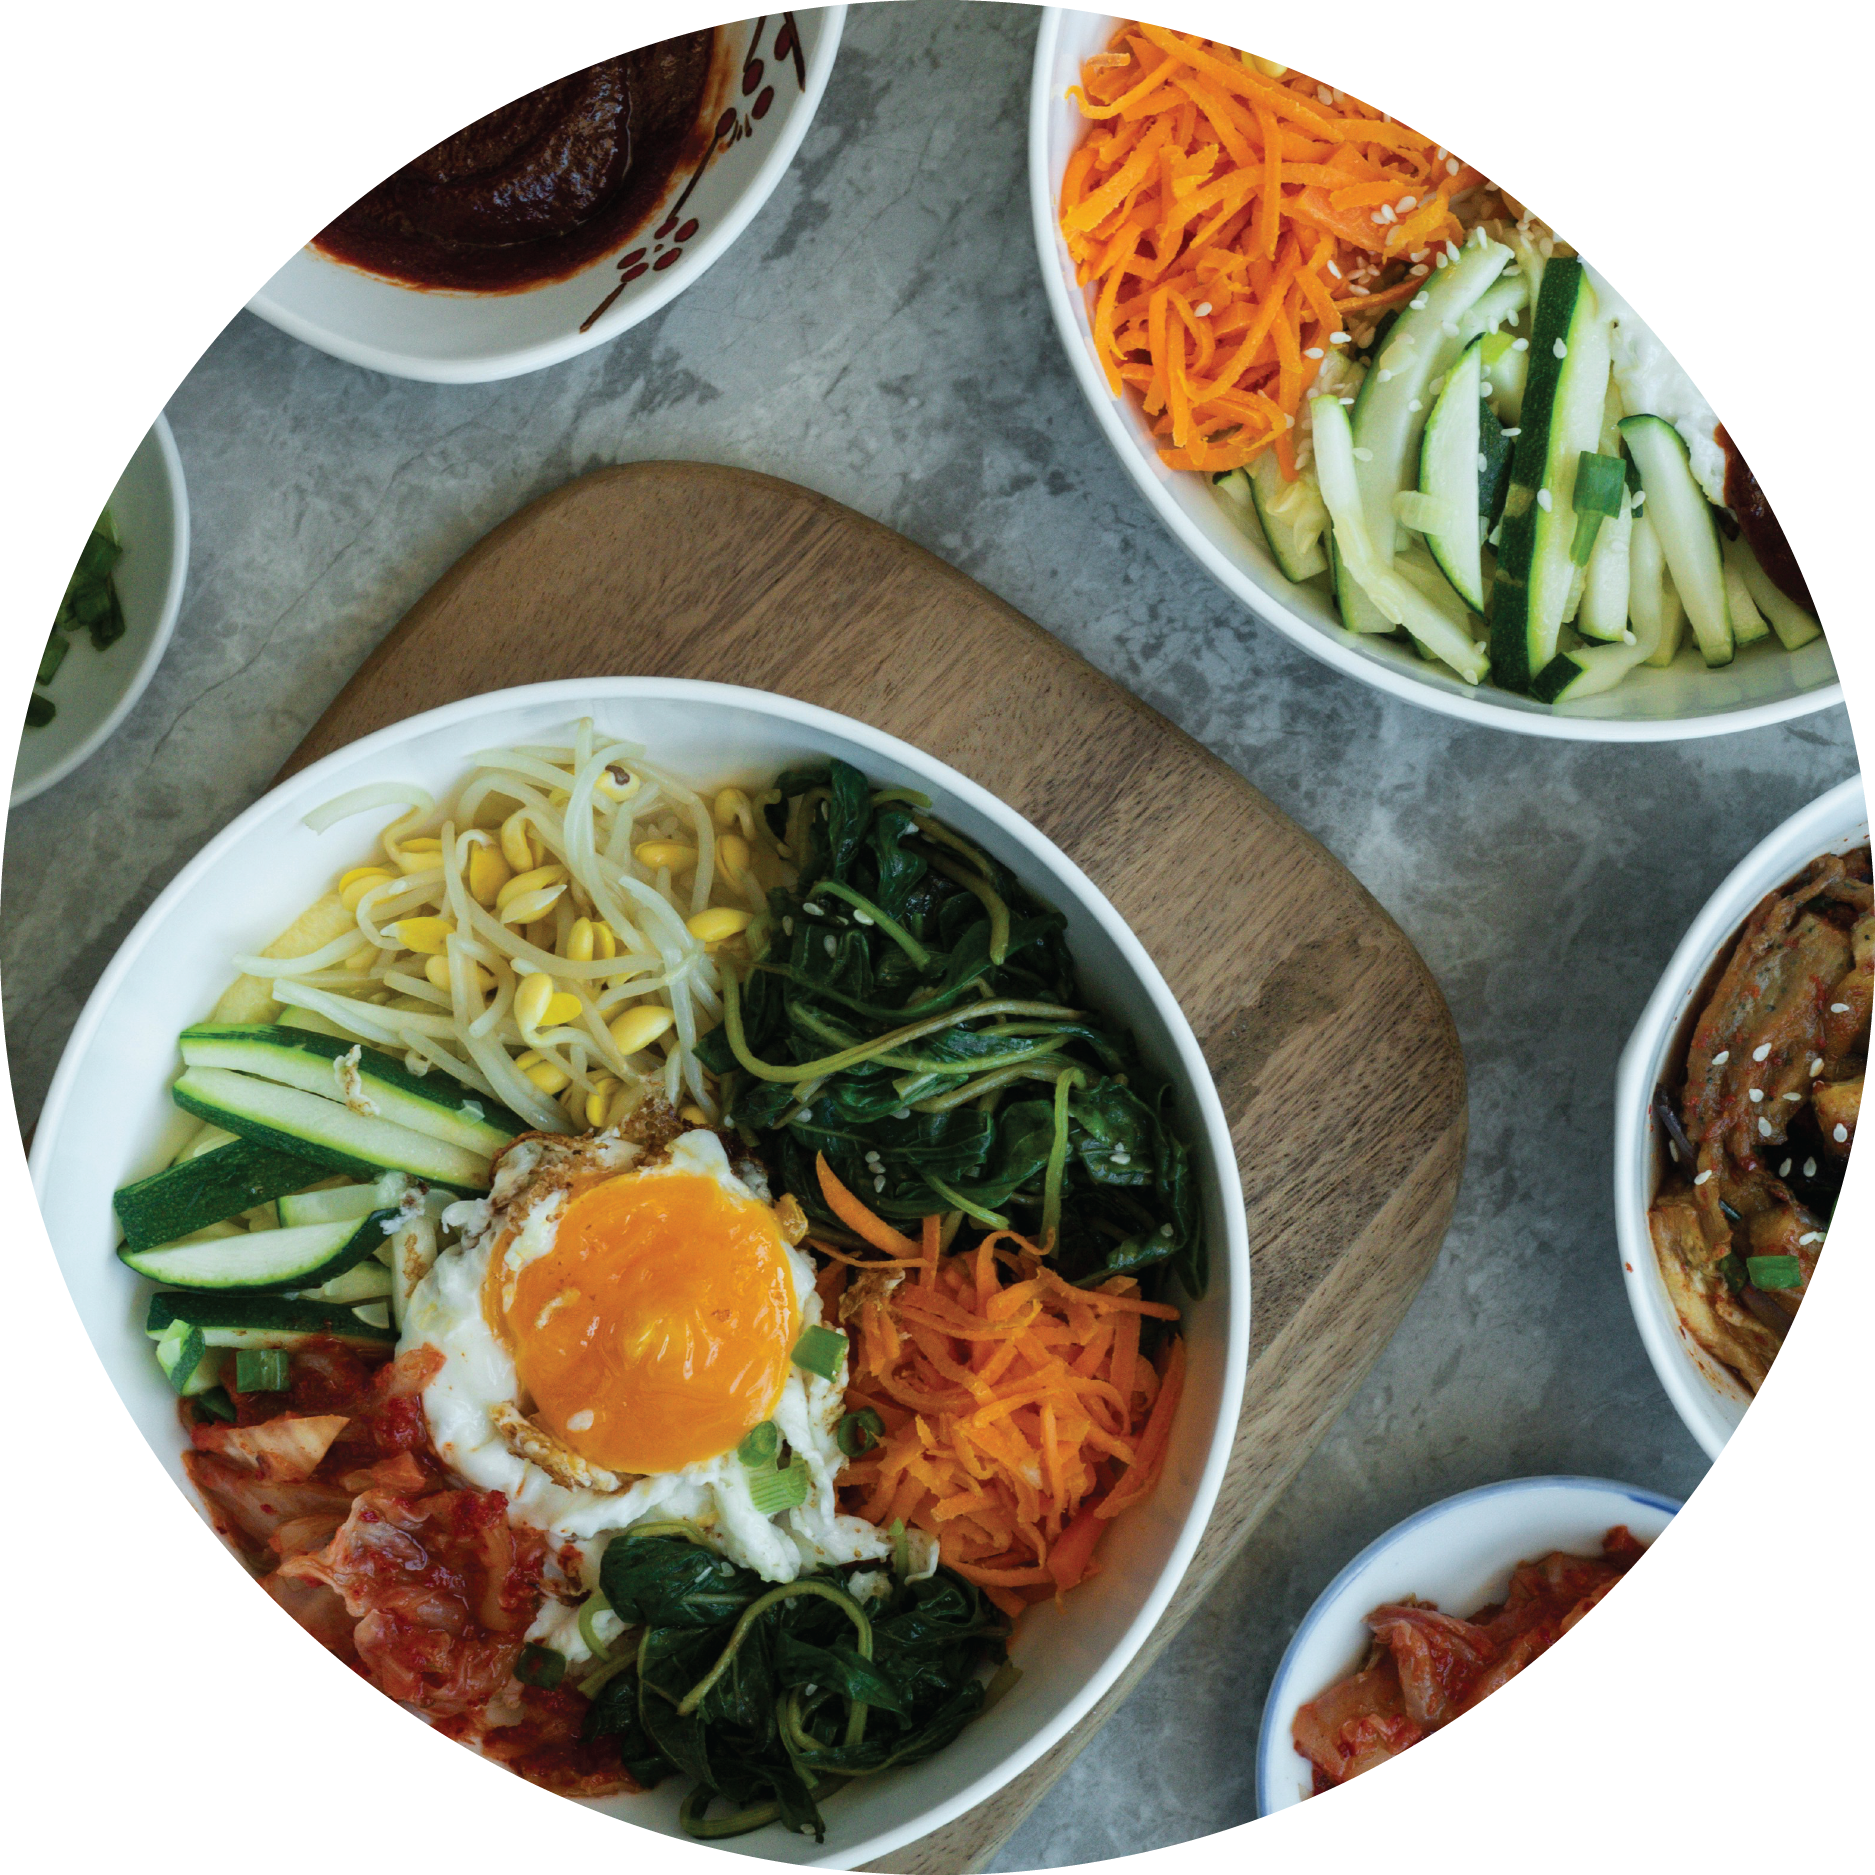 Post Office Square | Bibimbap&Grill bringing full-flavoured, light calorie meals to the CBD